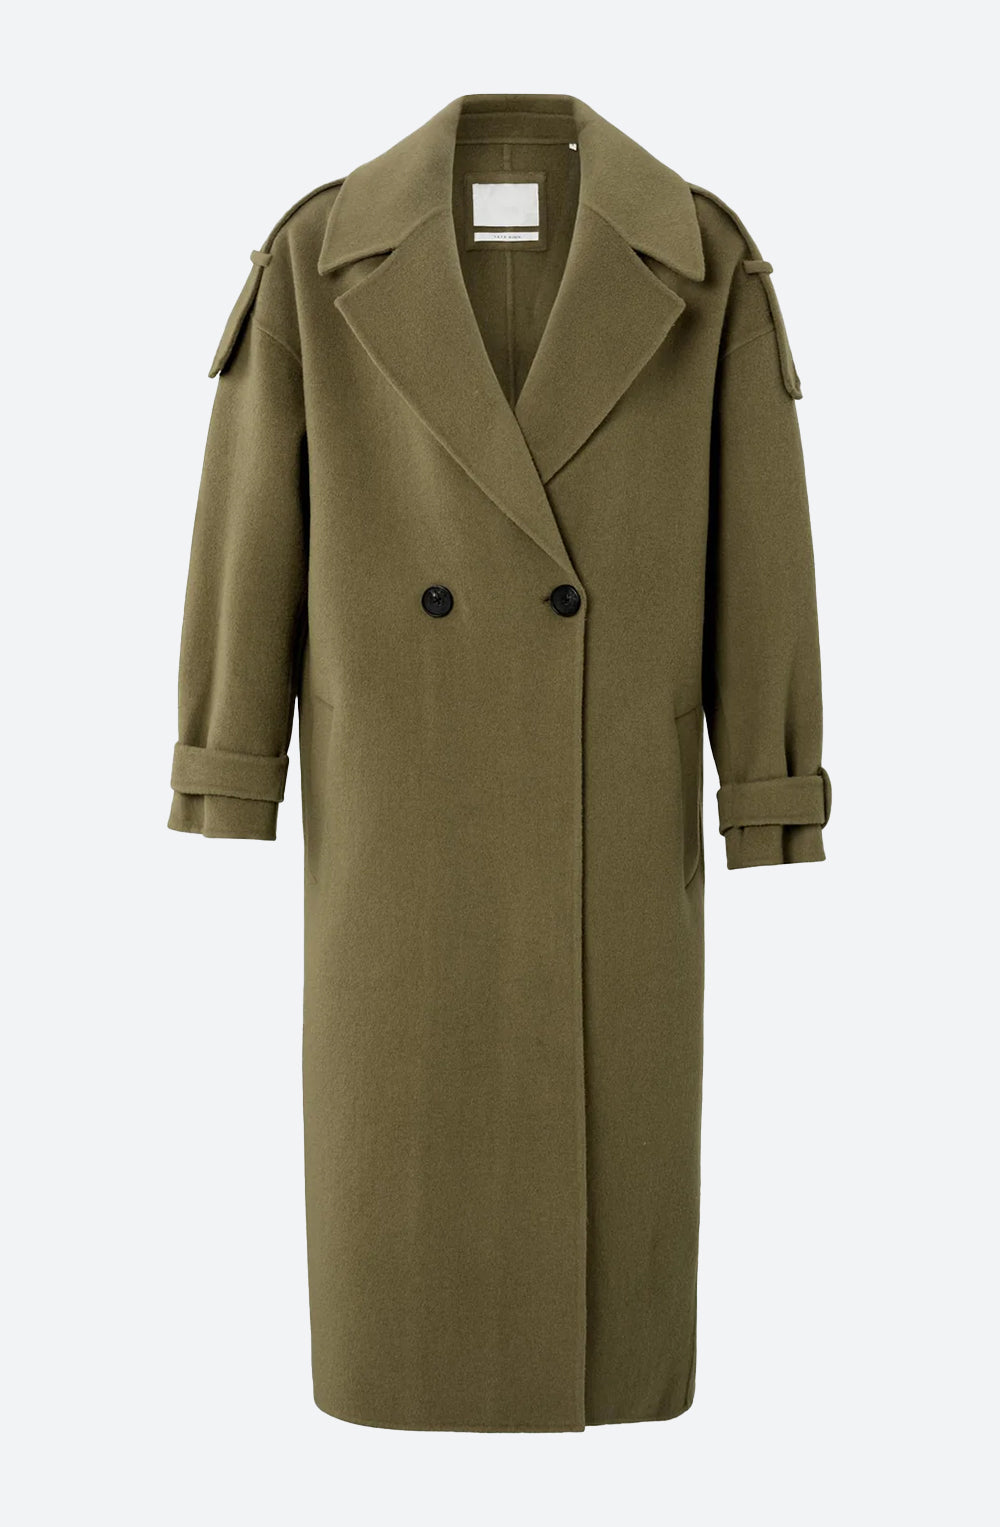 Long Double Breasted Coat in Gothic Olive Green